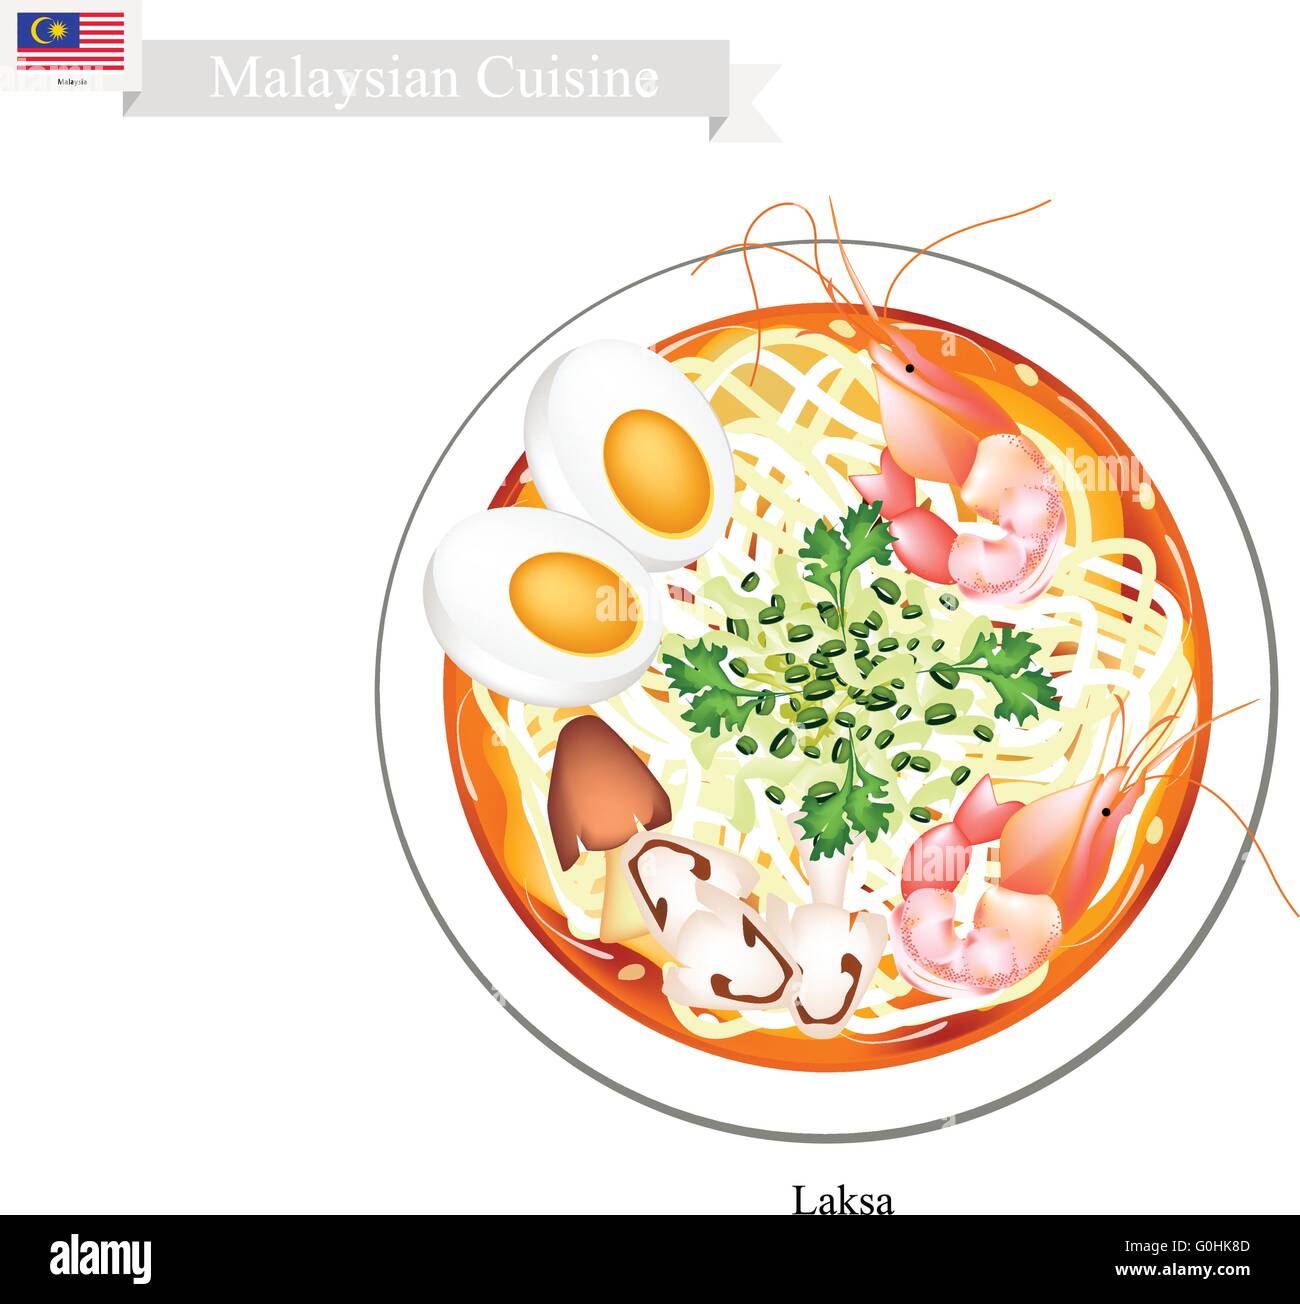 Malaysian Cuisine, Laksa or Traditional Rice Noodle Served in Spicy Soup. One of The Most Popular Dish in Malaysia. Stock Vector